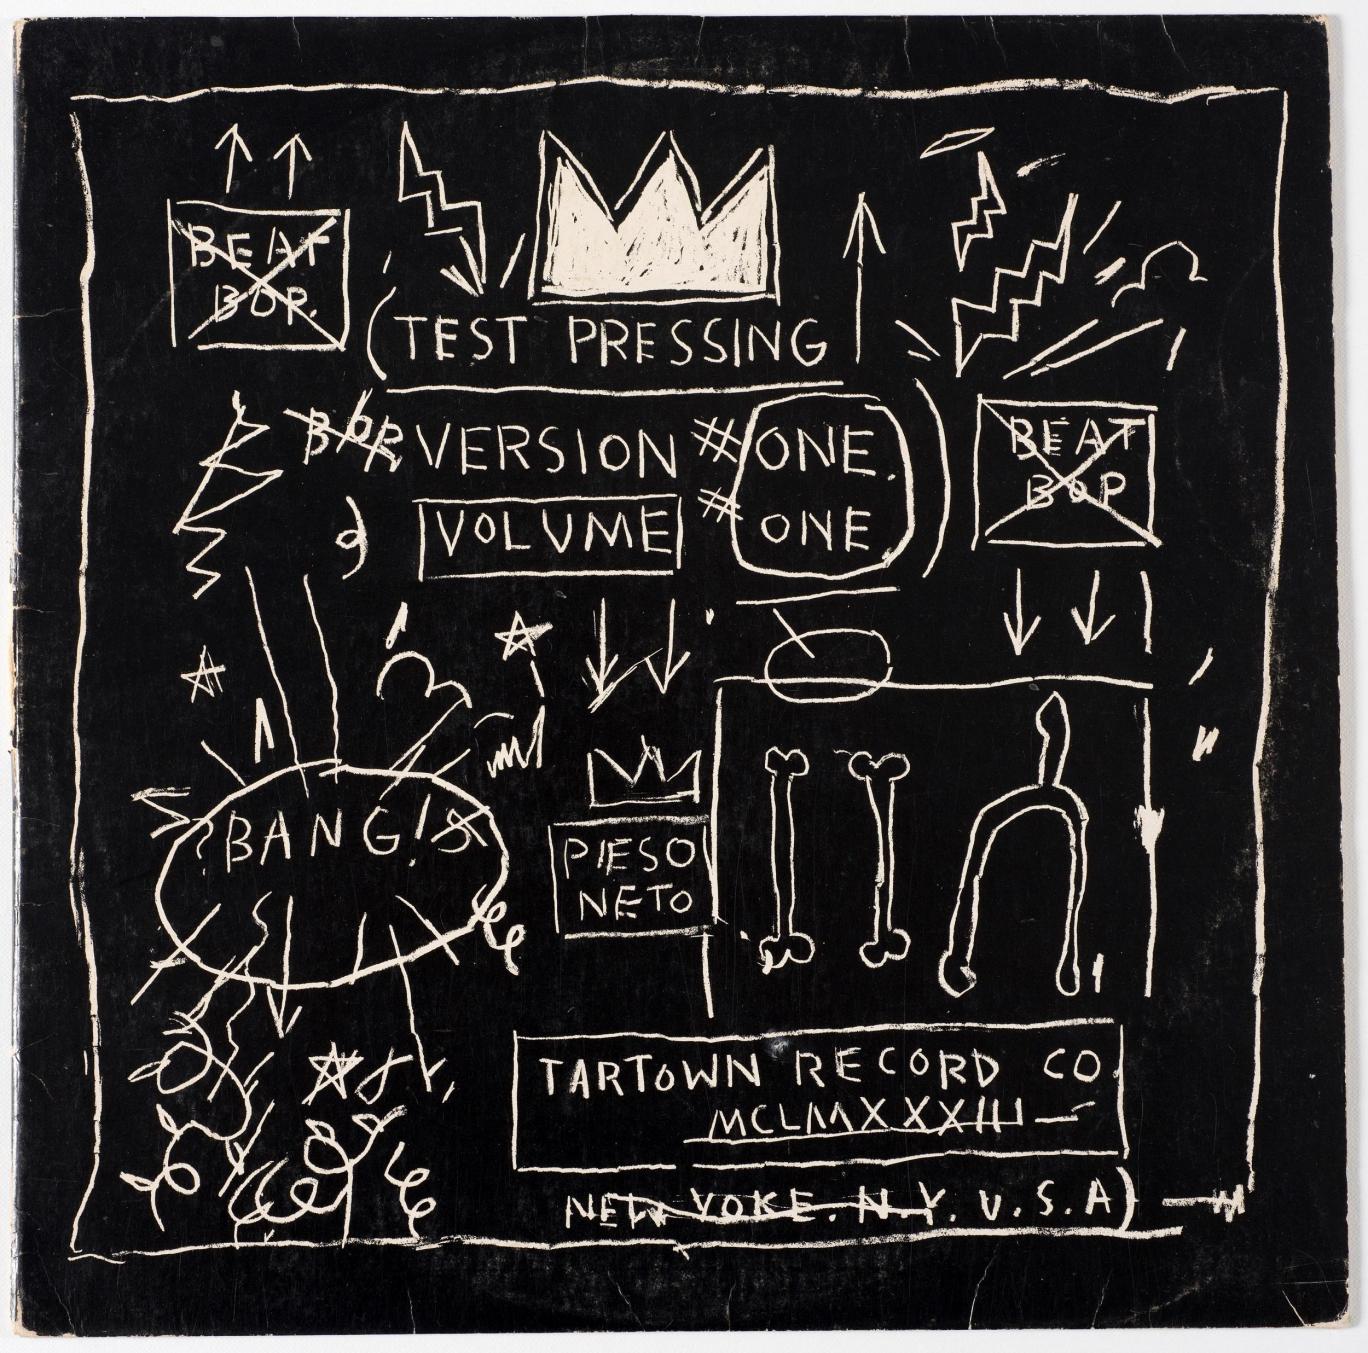 Rammellzee vs K-Rob, produced and with cover artwork by Jean-Michel Basquiat, ‘Beat Bop’ vinyl record, 1983